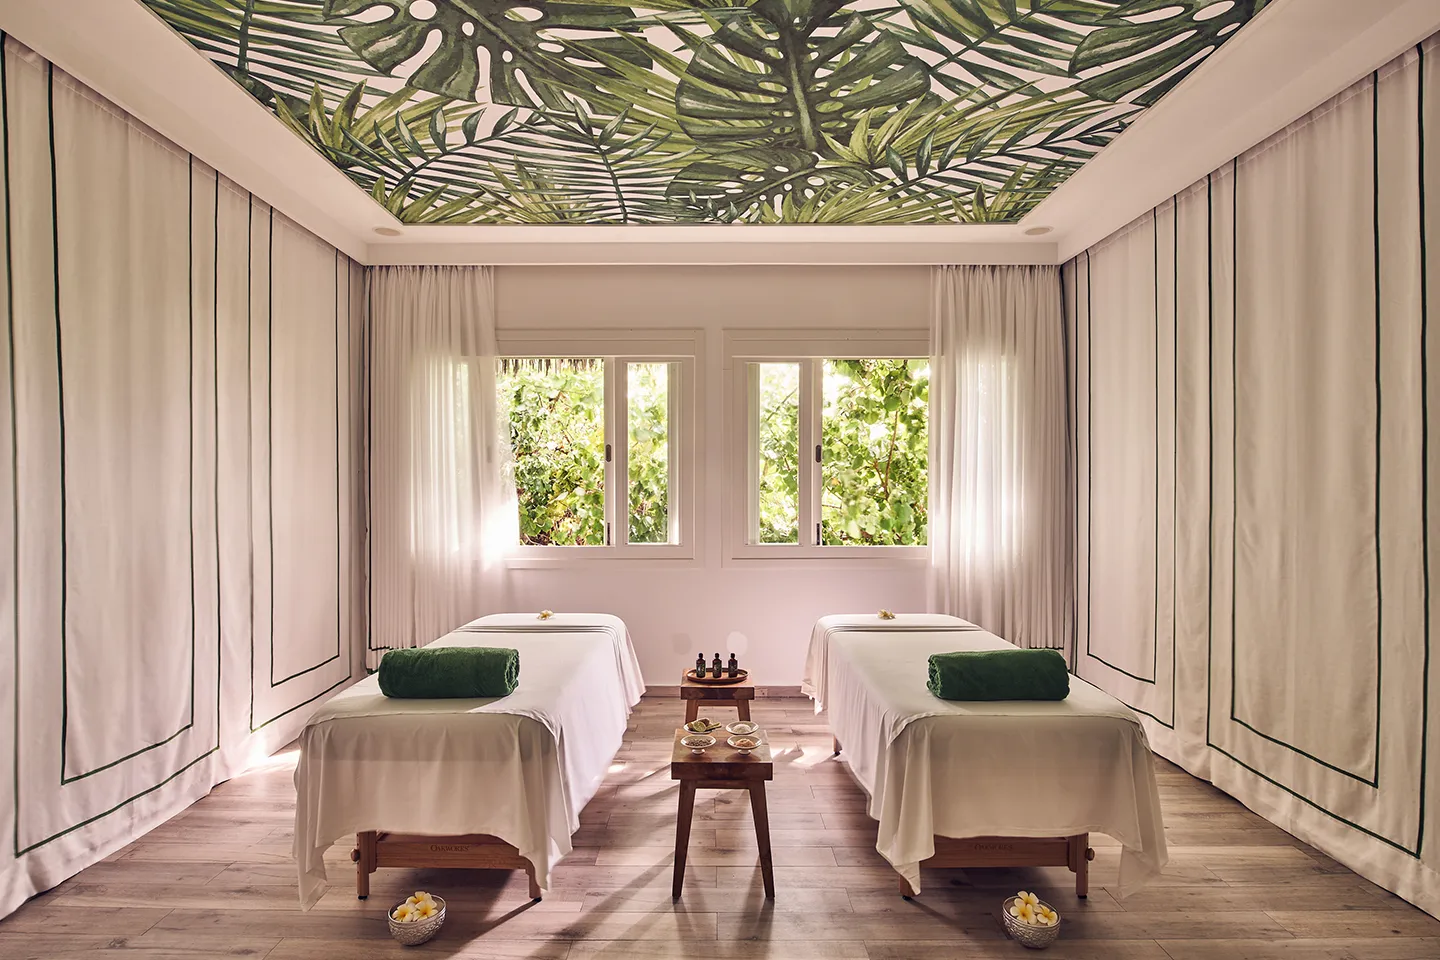 treatment room in the fehi spa with two loungers and ceiling decorated with palm trees